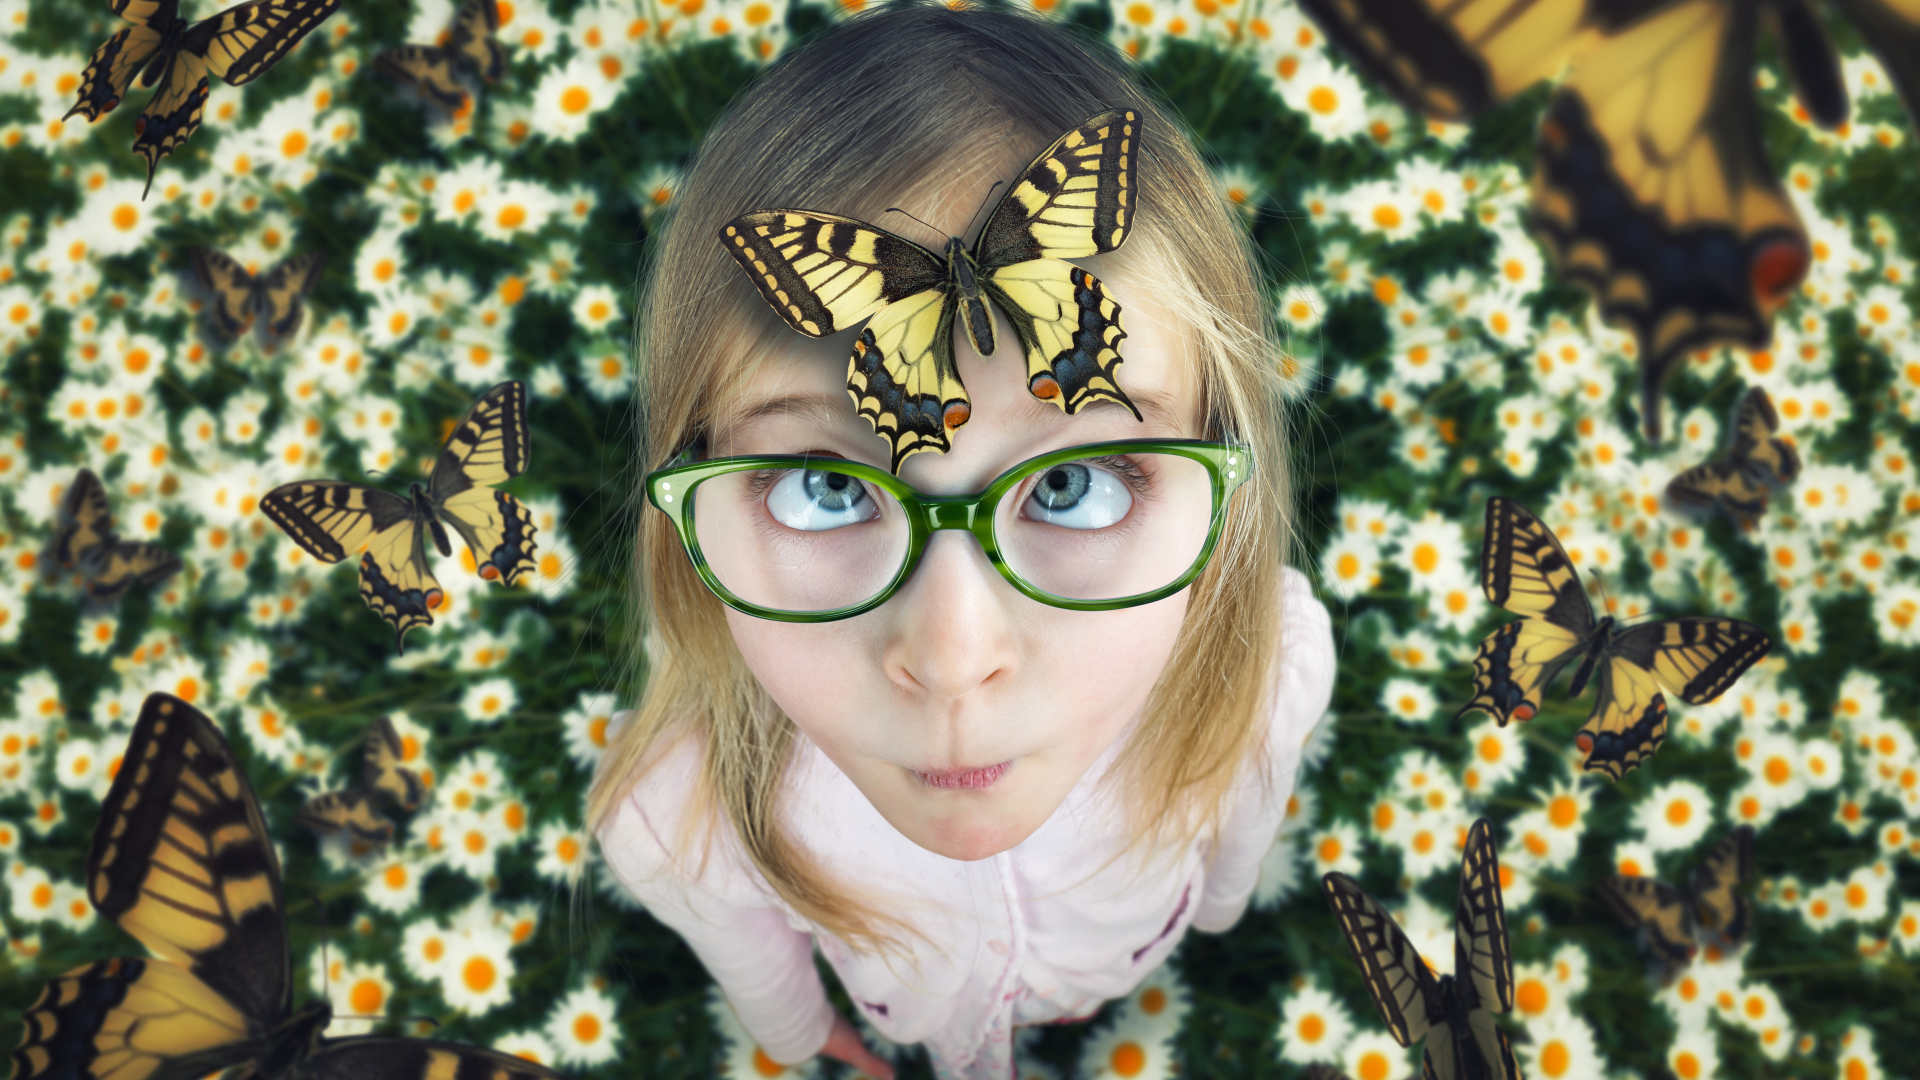 Funny girl with glasses with a butterfly on her head